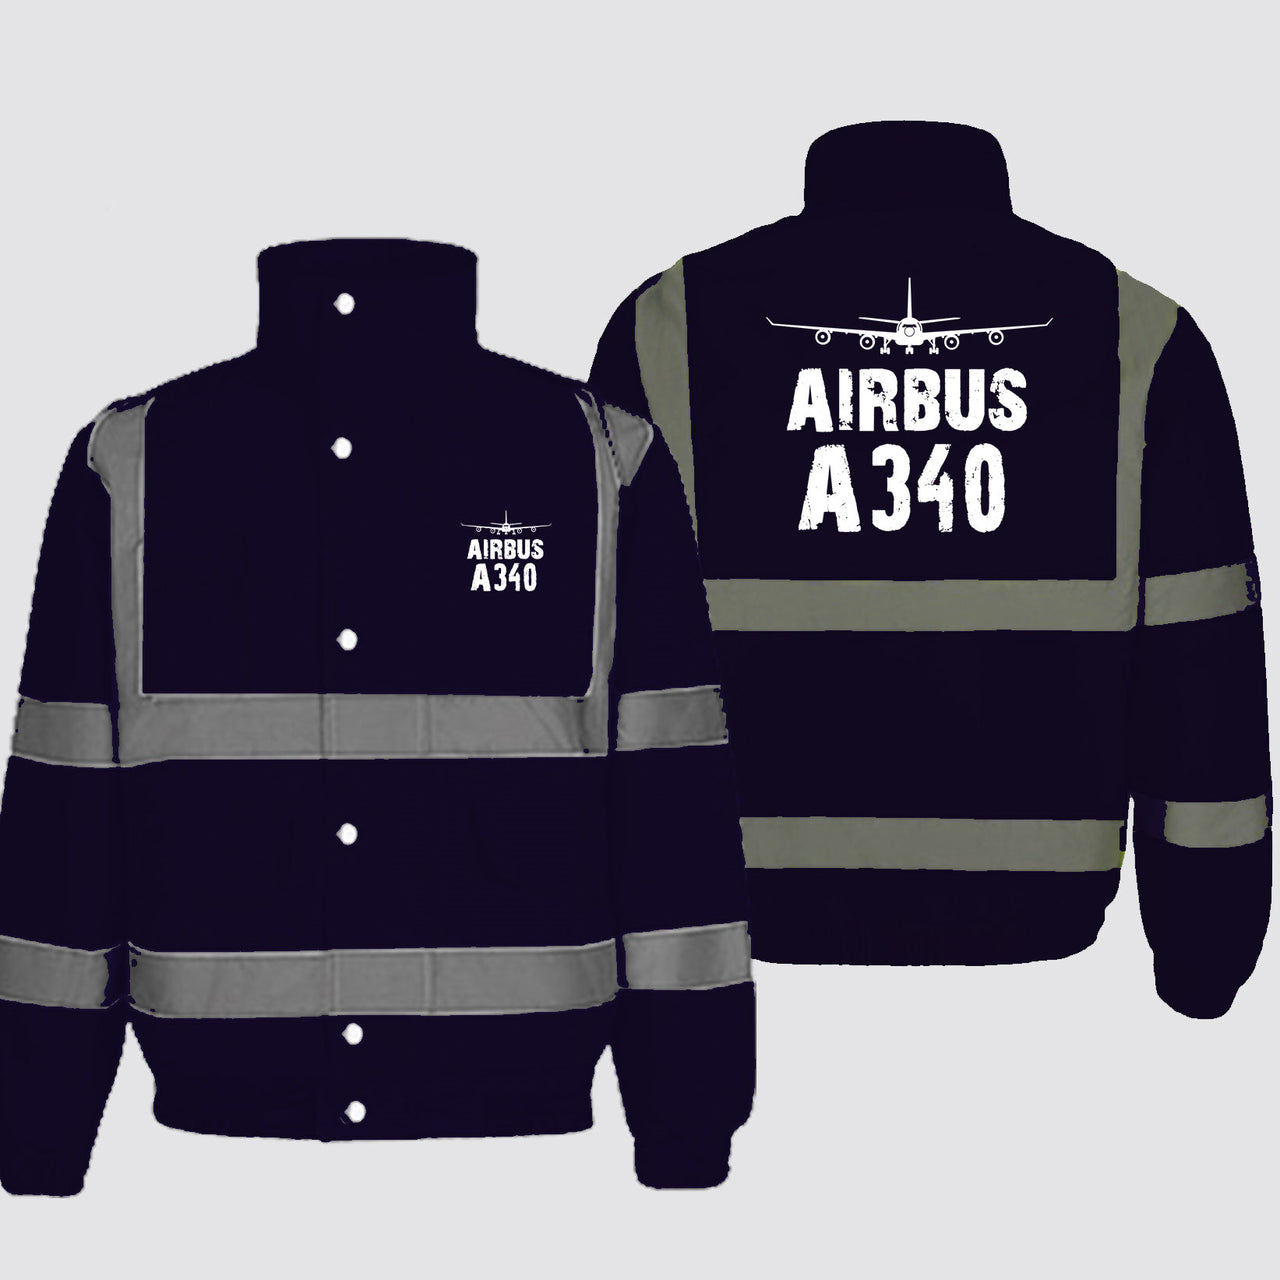 Airbus A340 & Plane Designed Reflective Winter Jackets